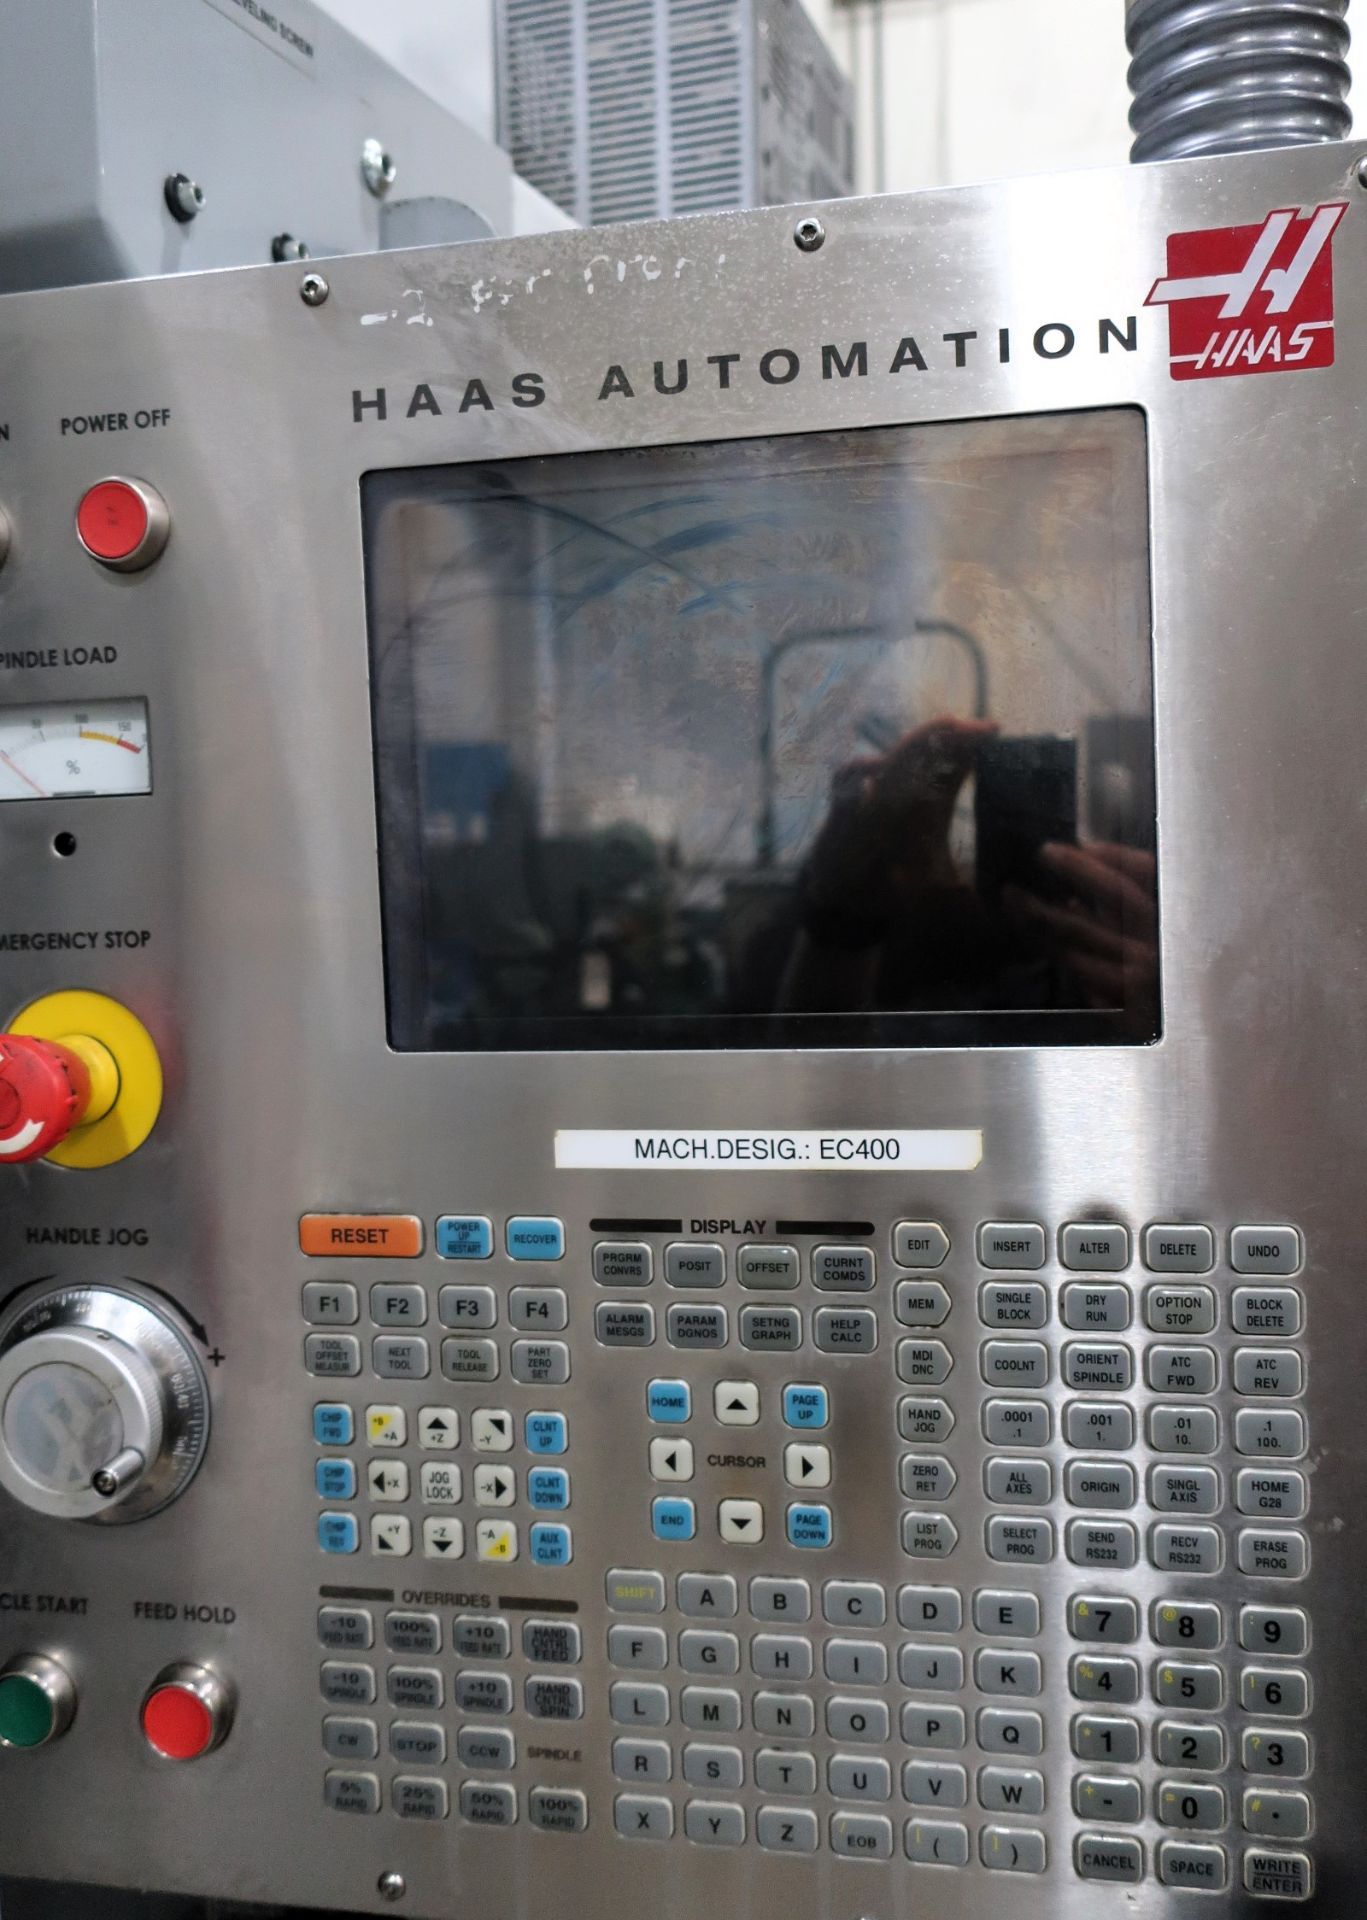 Haas EC-400 4-Axis Precision Horizontal Machining Center w/16" Pallets, S/N 51499, New 2005 - Image 2 of 16